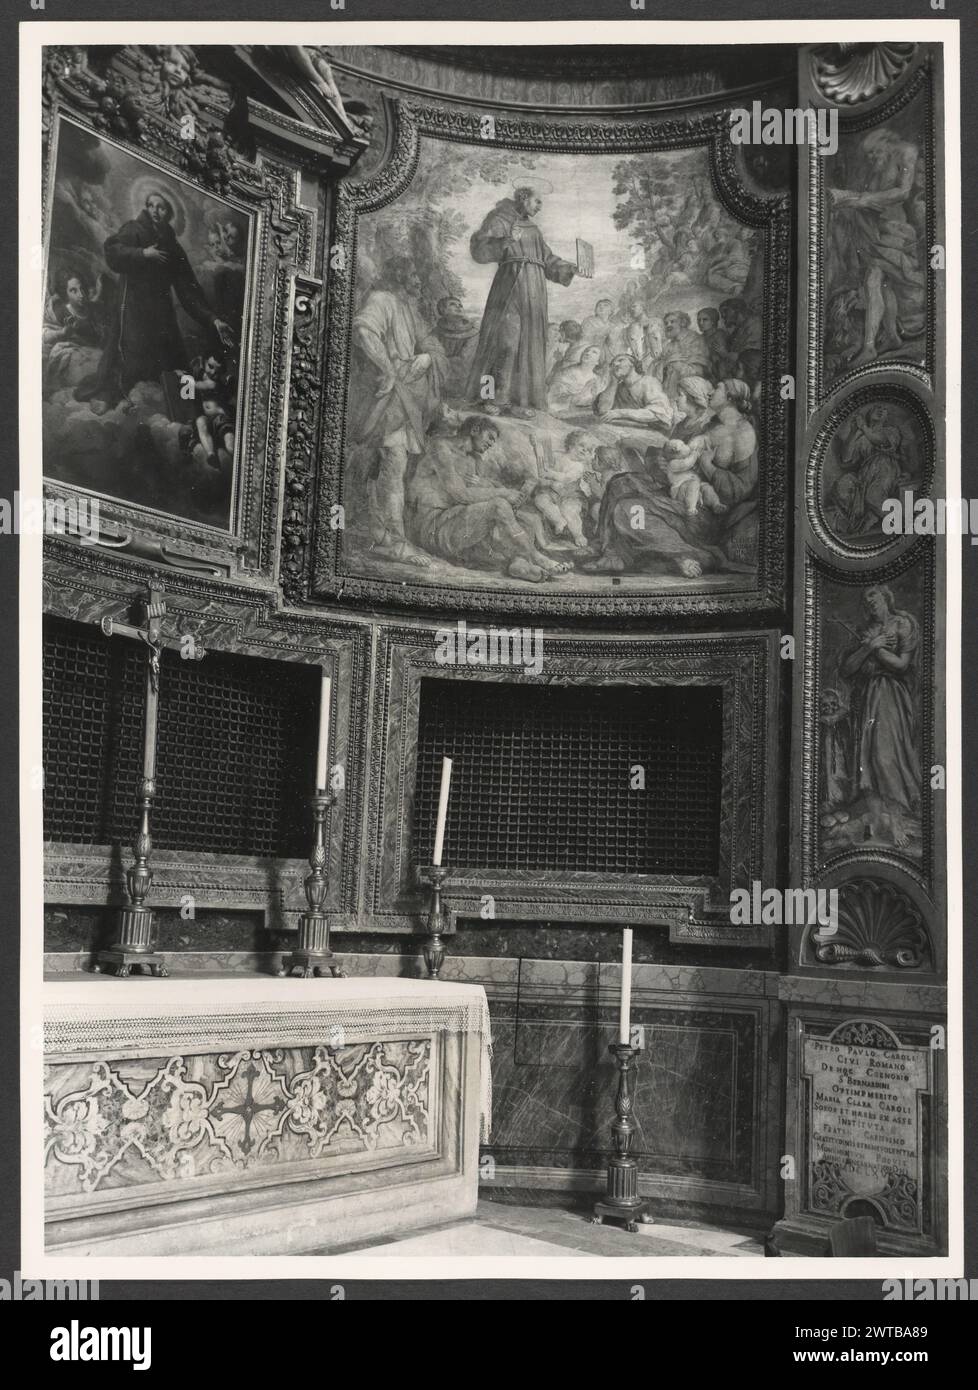 Lazio Roma Rome S. Bernardino. Hutzel, Max 1960-1990 Post-medieval: 17th century architecture (1625), paintings on canvas, fresco paintings, church furnishings German-born photographer and scholar Max Hutzel (1911-1988) photographed in Italy from the early 1960s until his death. The result of this project, referred to by Hutzel as Foto Arte Minore, is thorough documentation of art historical development in Italy up to the 18th century, including objects of the Etruscans and the Romans, as well as early Medieval, Romanesque, Gothic, Renaissance and Baroque monuments. Images are organized by geo Stock Photo